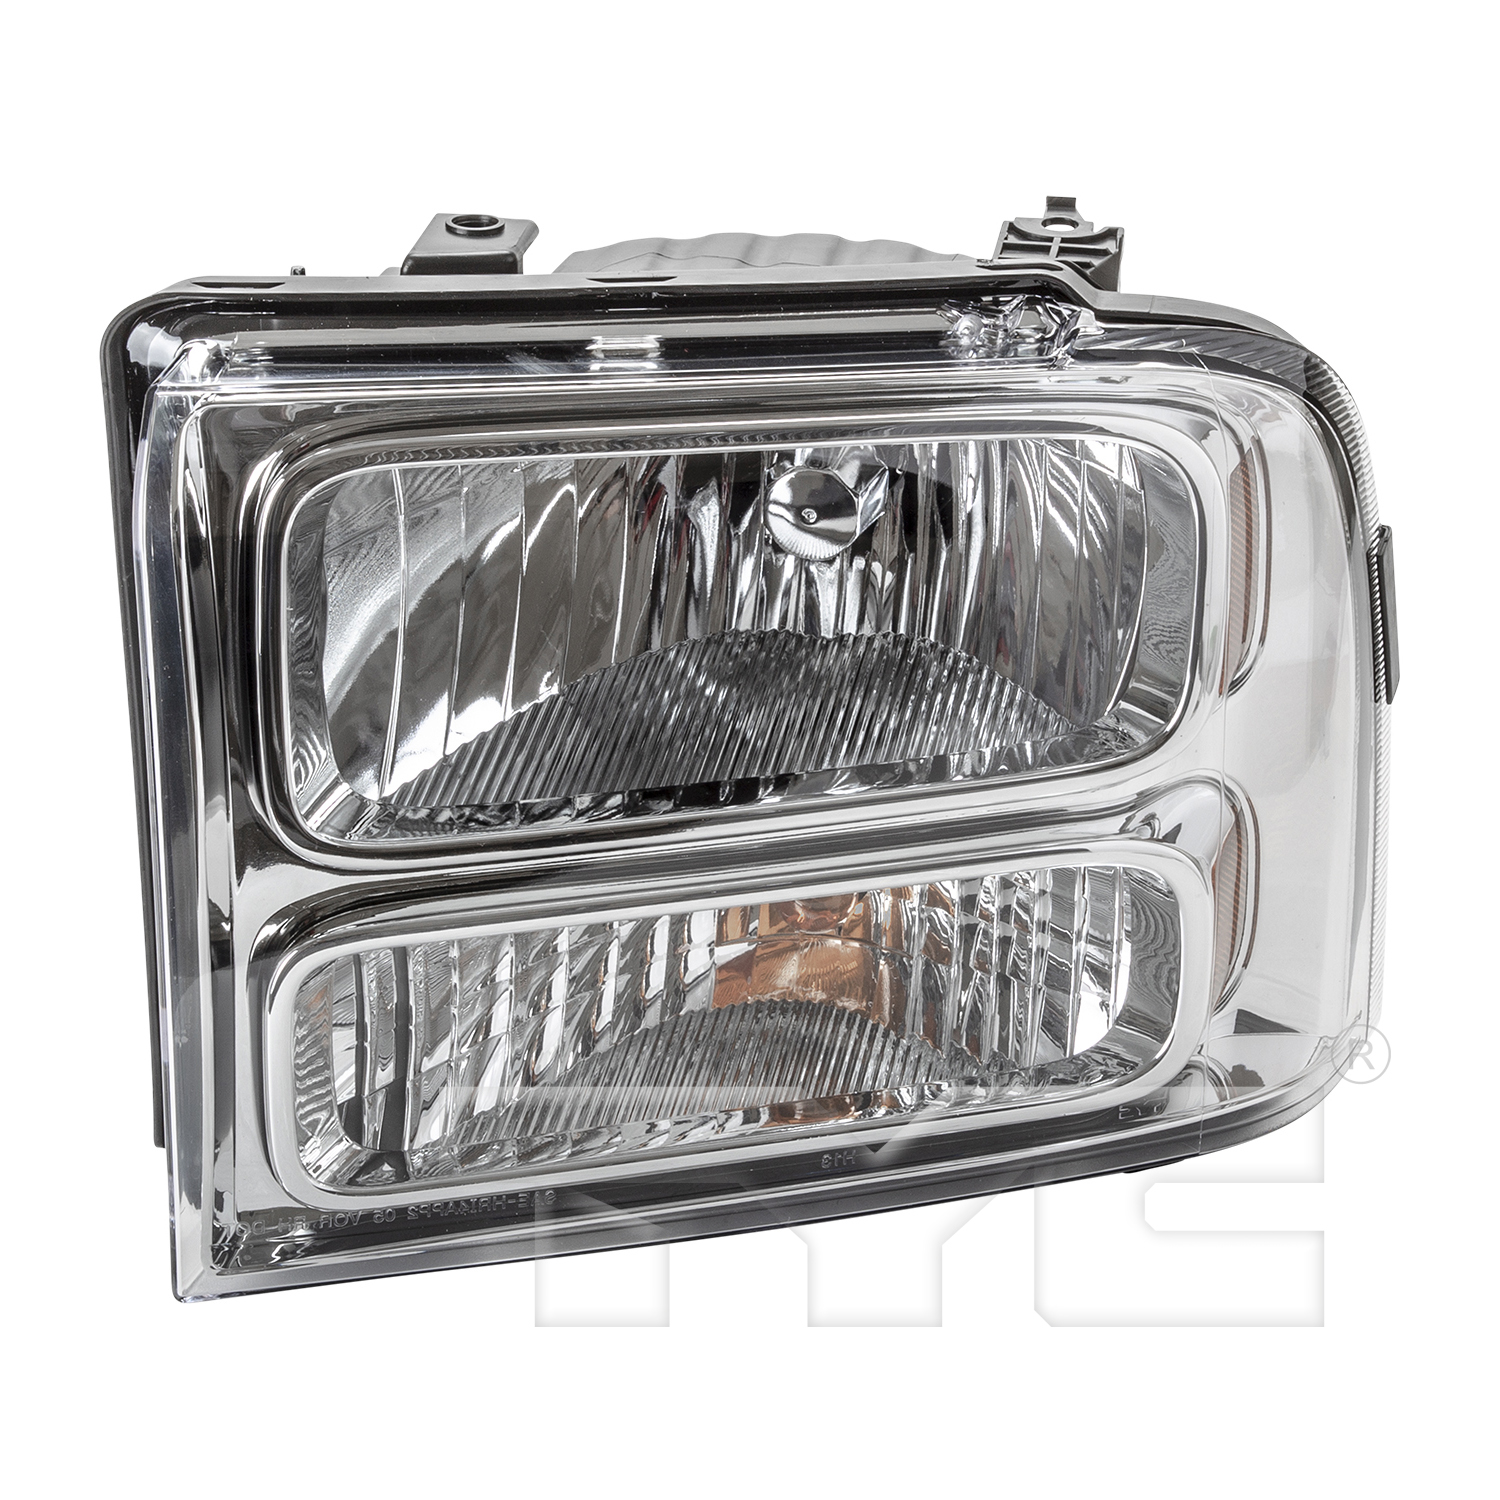 Aftermarket HEADLIGHTS for FORD - F-250 SUPER DUTY, F-250 SUPER DUTY,04-07,LT Headlamp assy composite